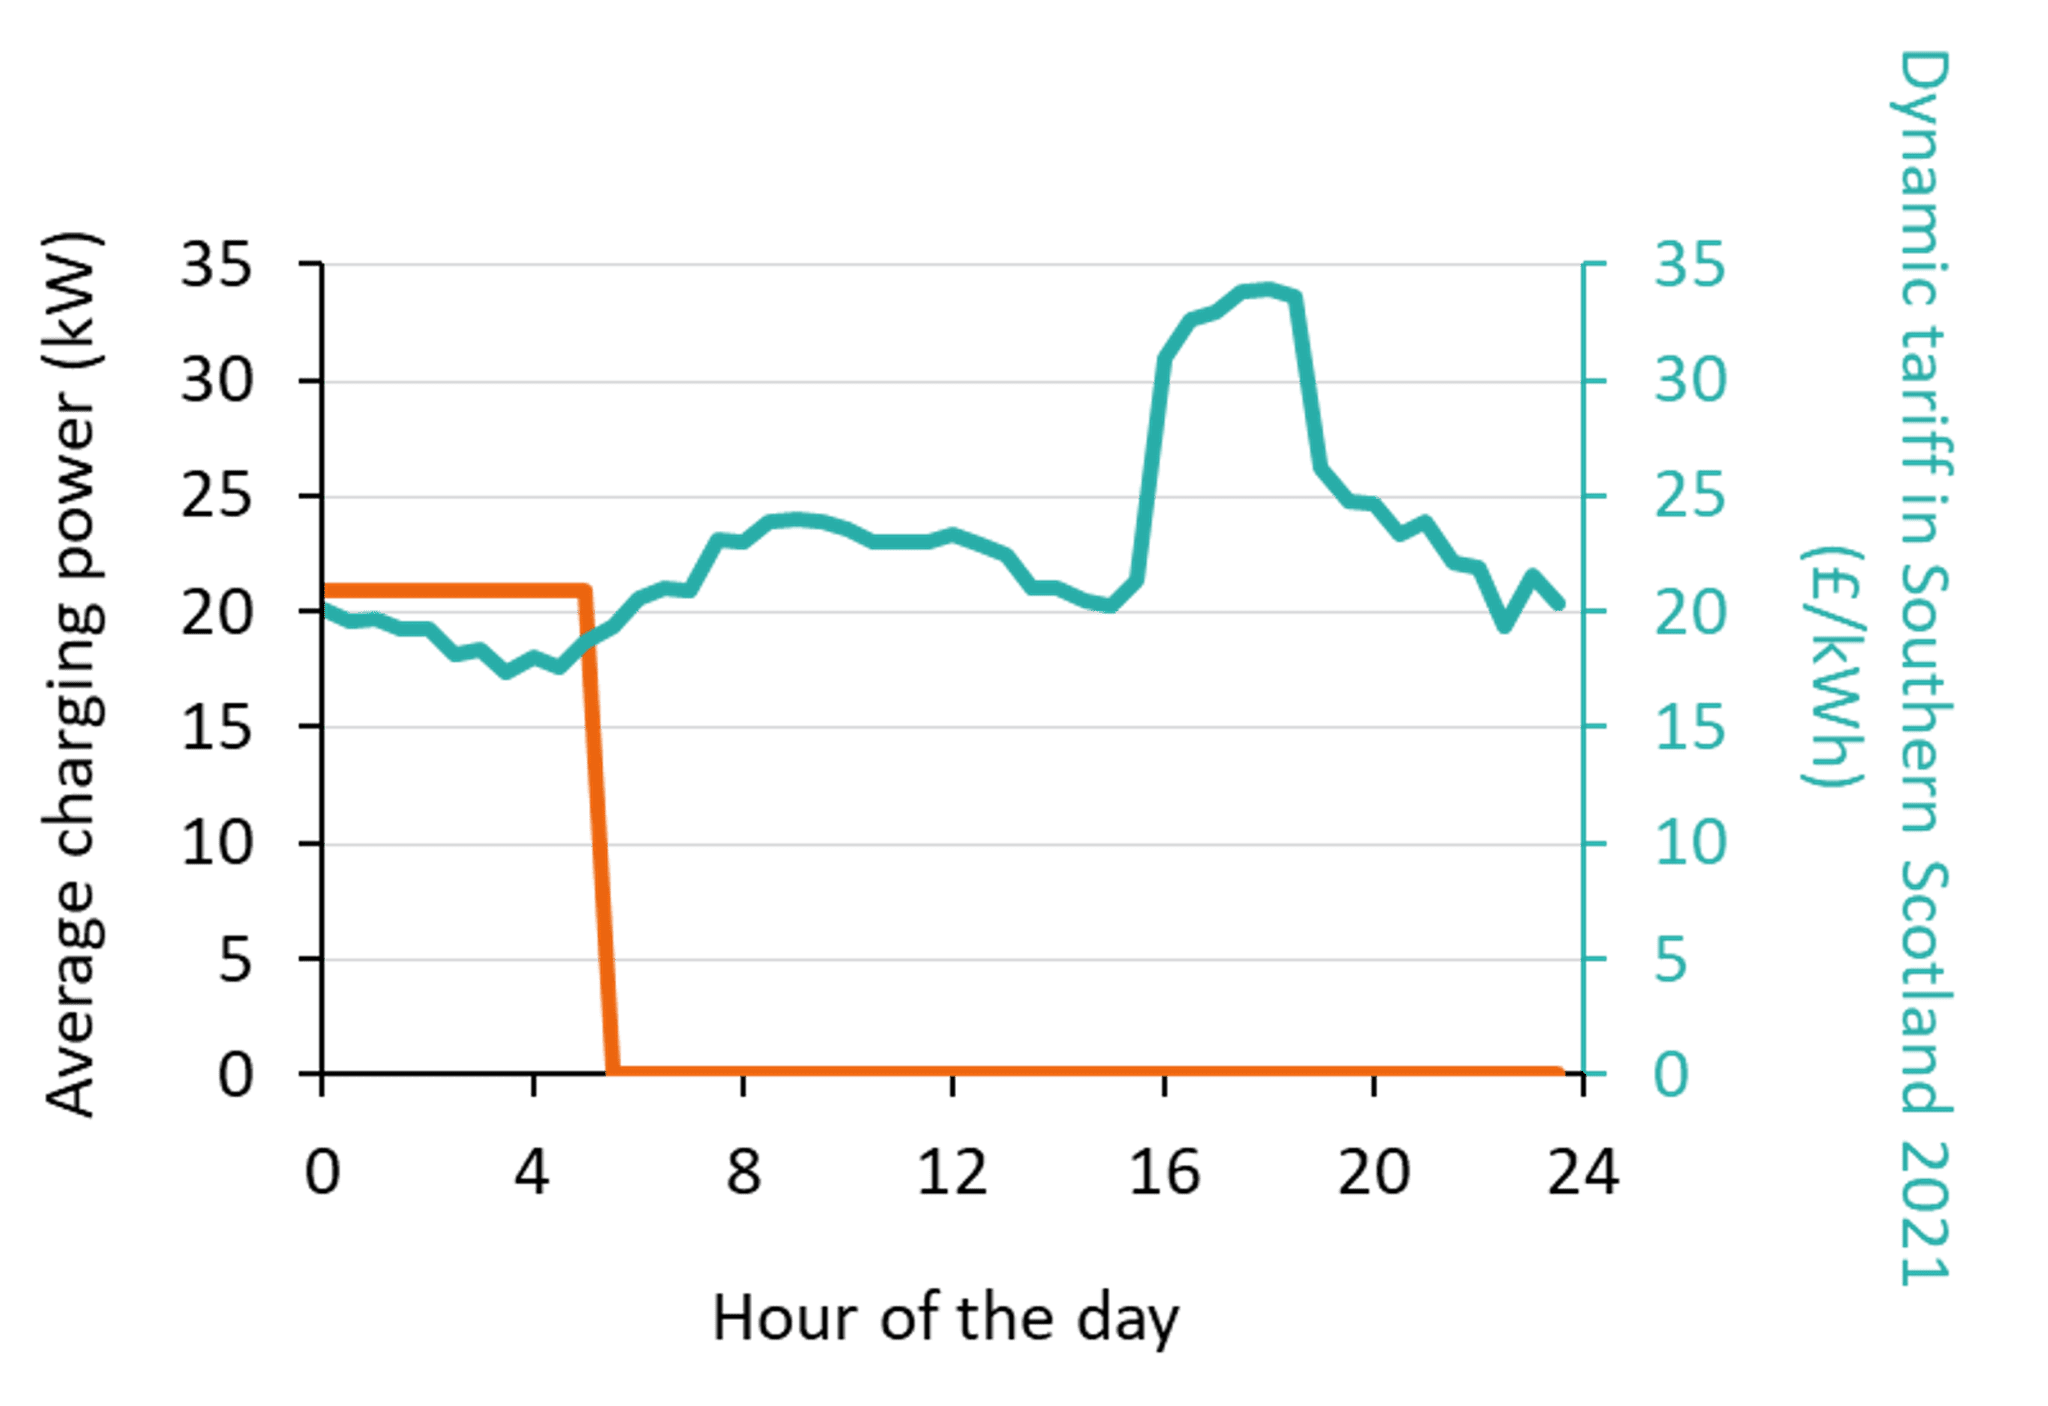 The chart shows the average charging profile of an urban bus (orange line corresponding to the left y-axis) with a dynamic tariff (turquoise line corresponding to the right y-axis). 